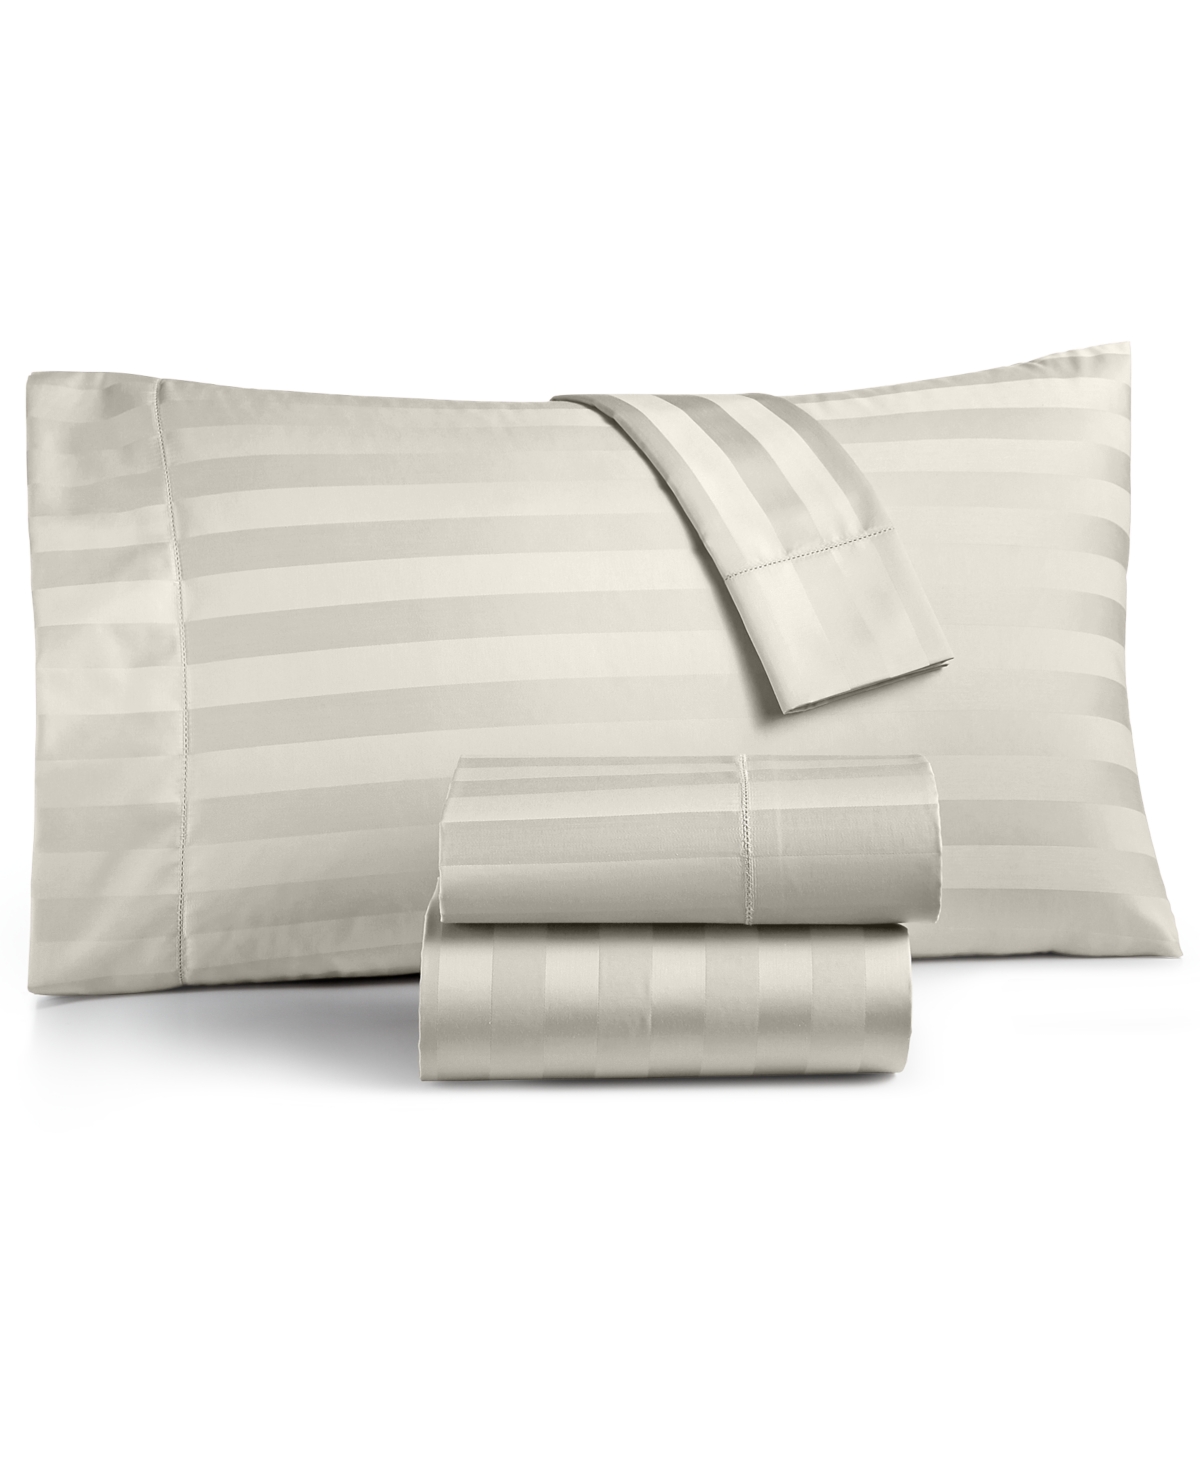 Charter Club Damask 1.5" Stripe Extra Deep Pocket 550 Thread Count 100% Cotton 4-pc. Sheet Set, California King, In Ivory